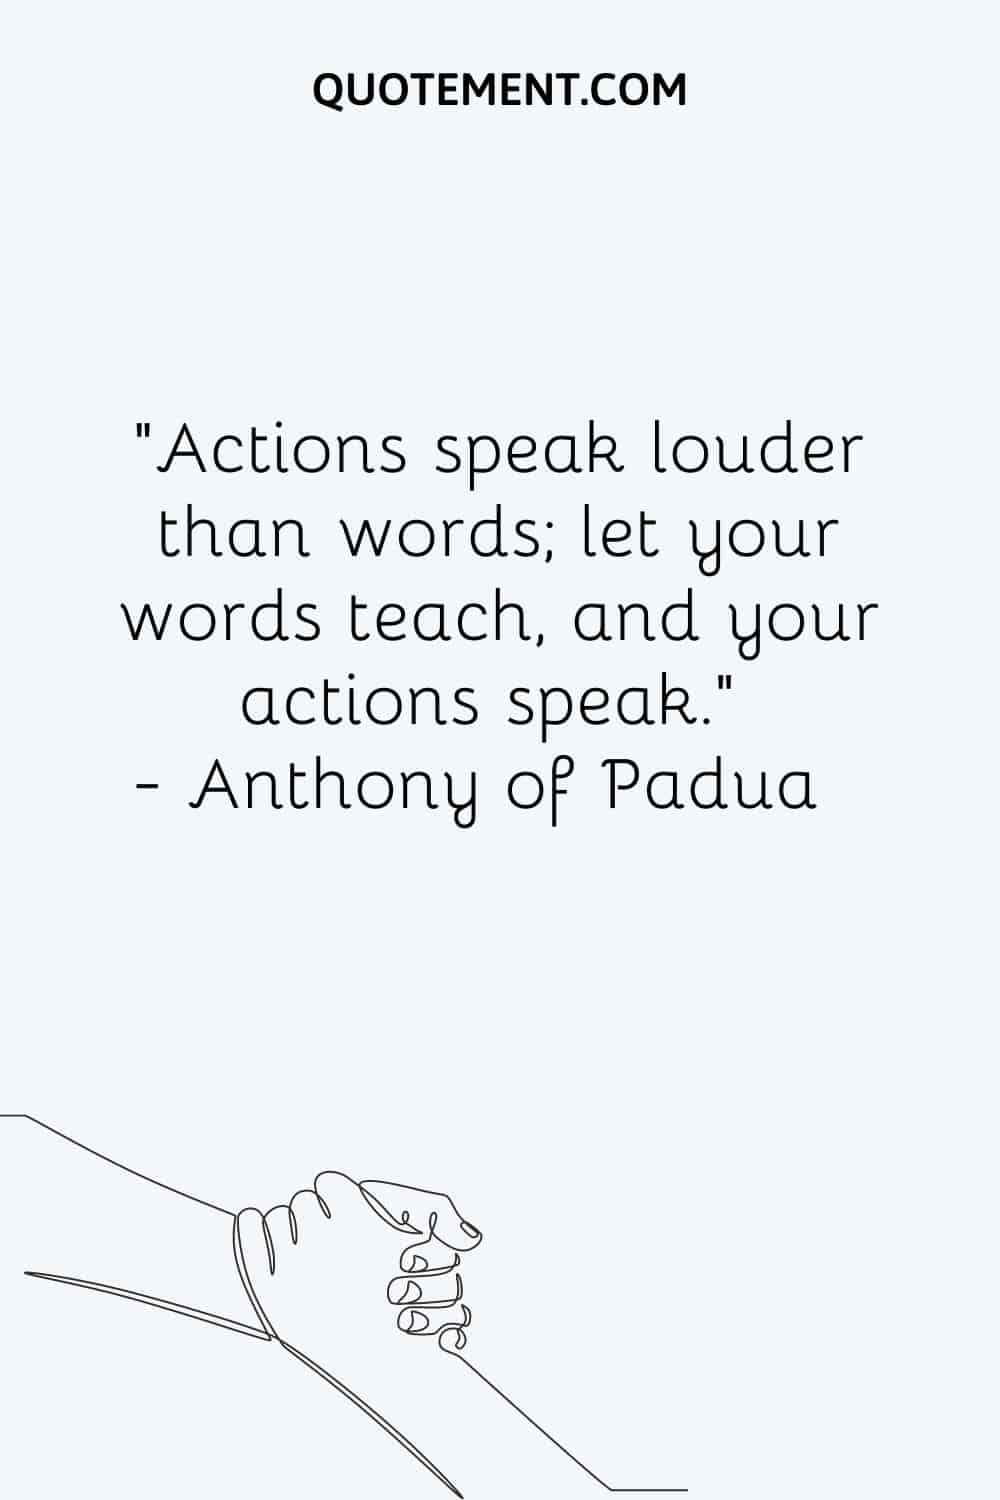 hand in hand illustration representing actions speak louder than words quote